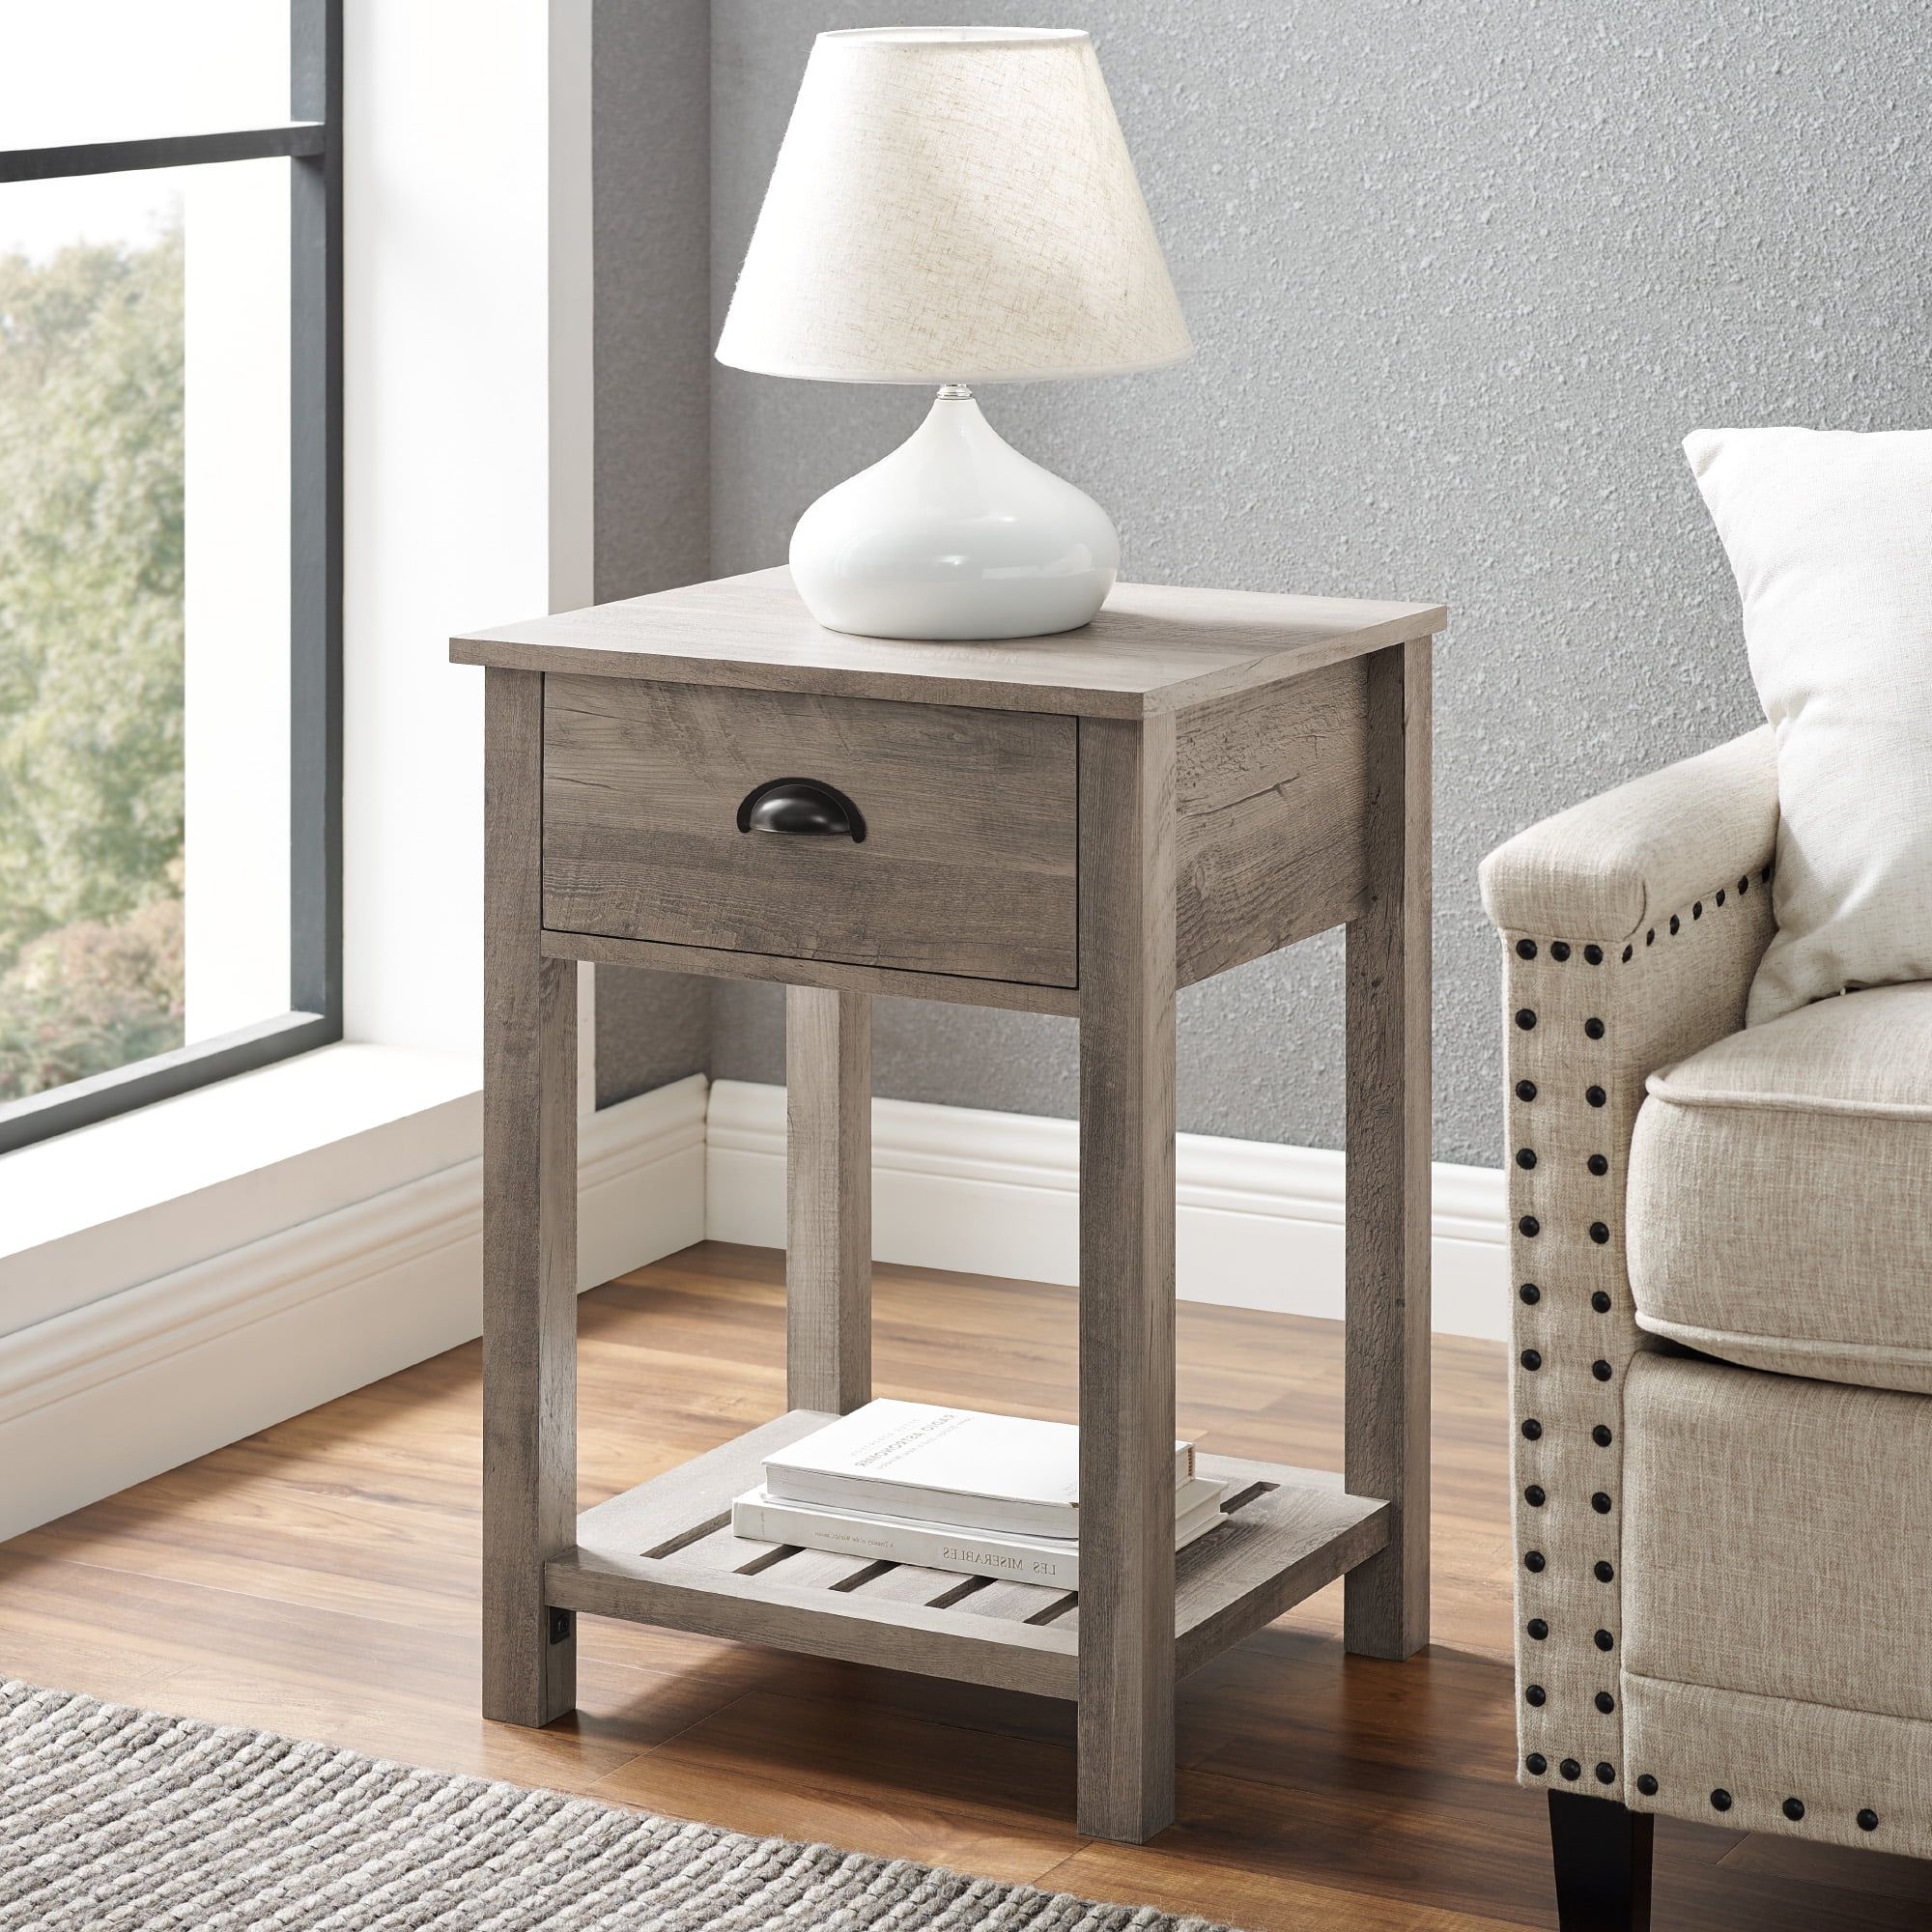 Woven Paths Farmhouse Single Drawer Open Shelf End Table, Grey Wash Pertaining To Rustic Gray End Tables (View 16 of 20)